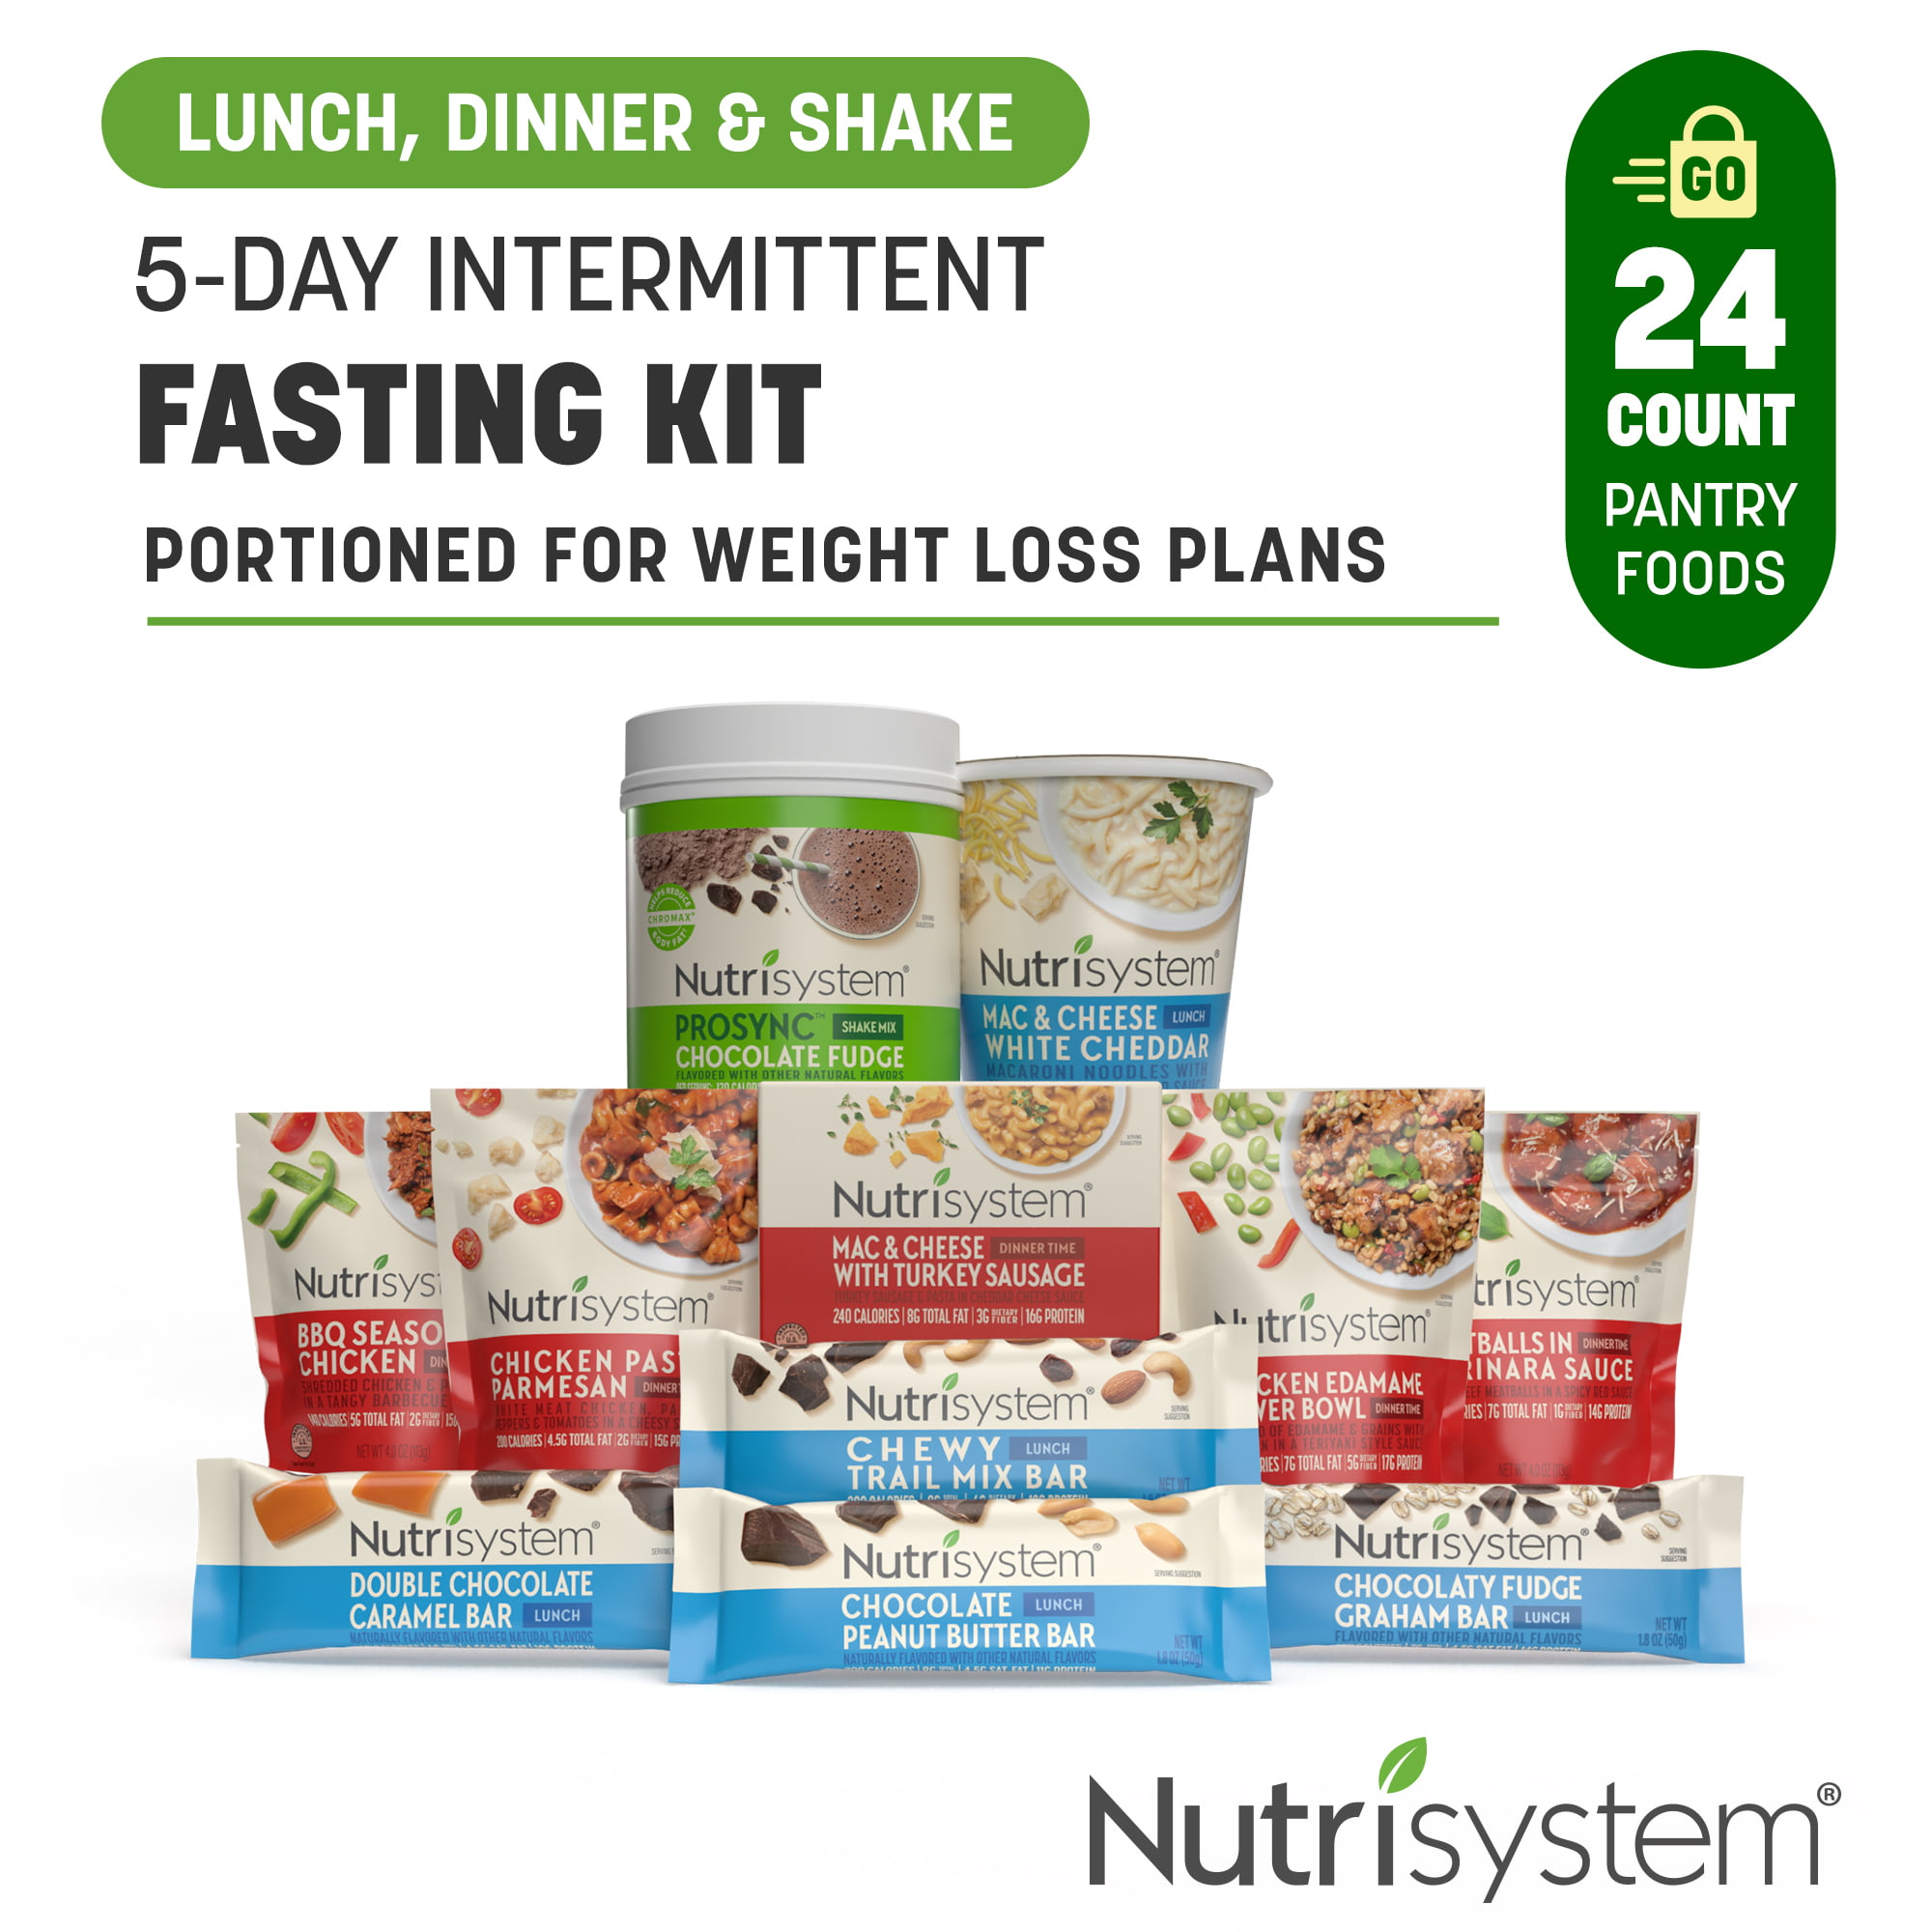 Can You Do Intermittent Fasting on Nutrisystem?